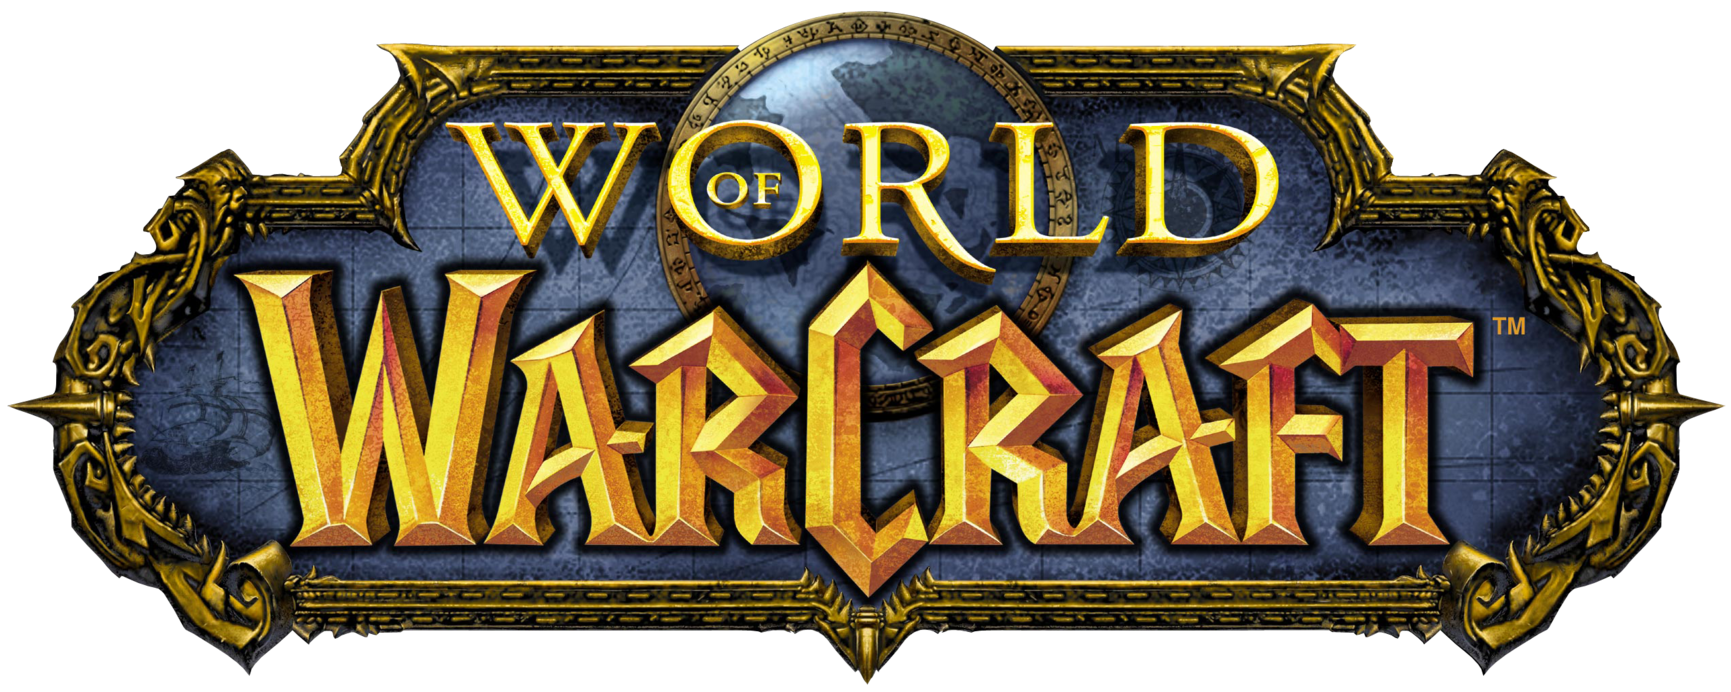 World of Warcraft - Wowpedia - Your wiki guide to the World of